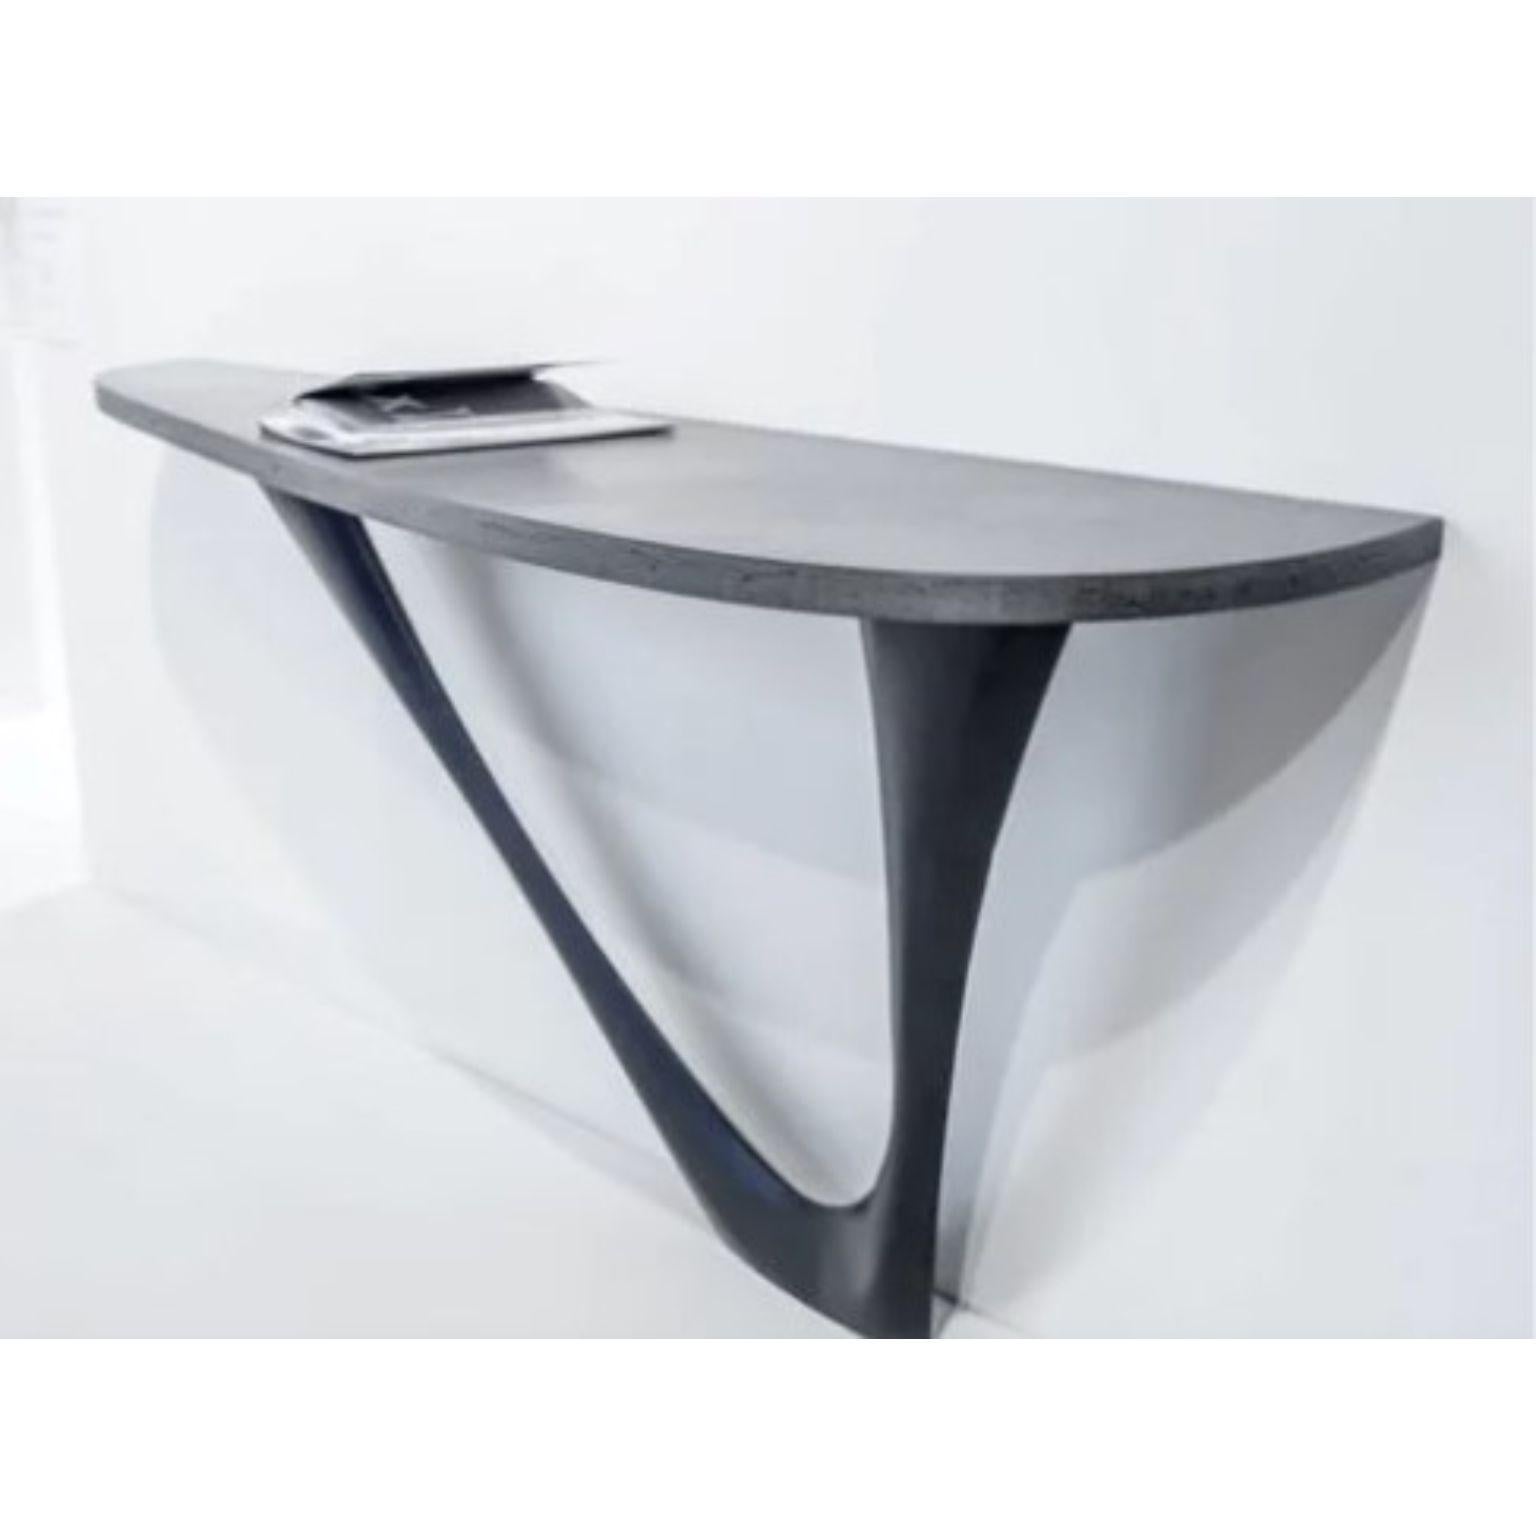 Moss Grey G-Console Steel Base with Steel Top Mono by Zieta For Sale 1